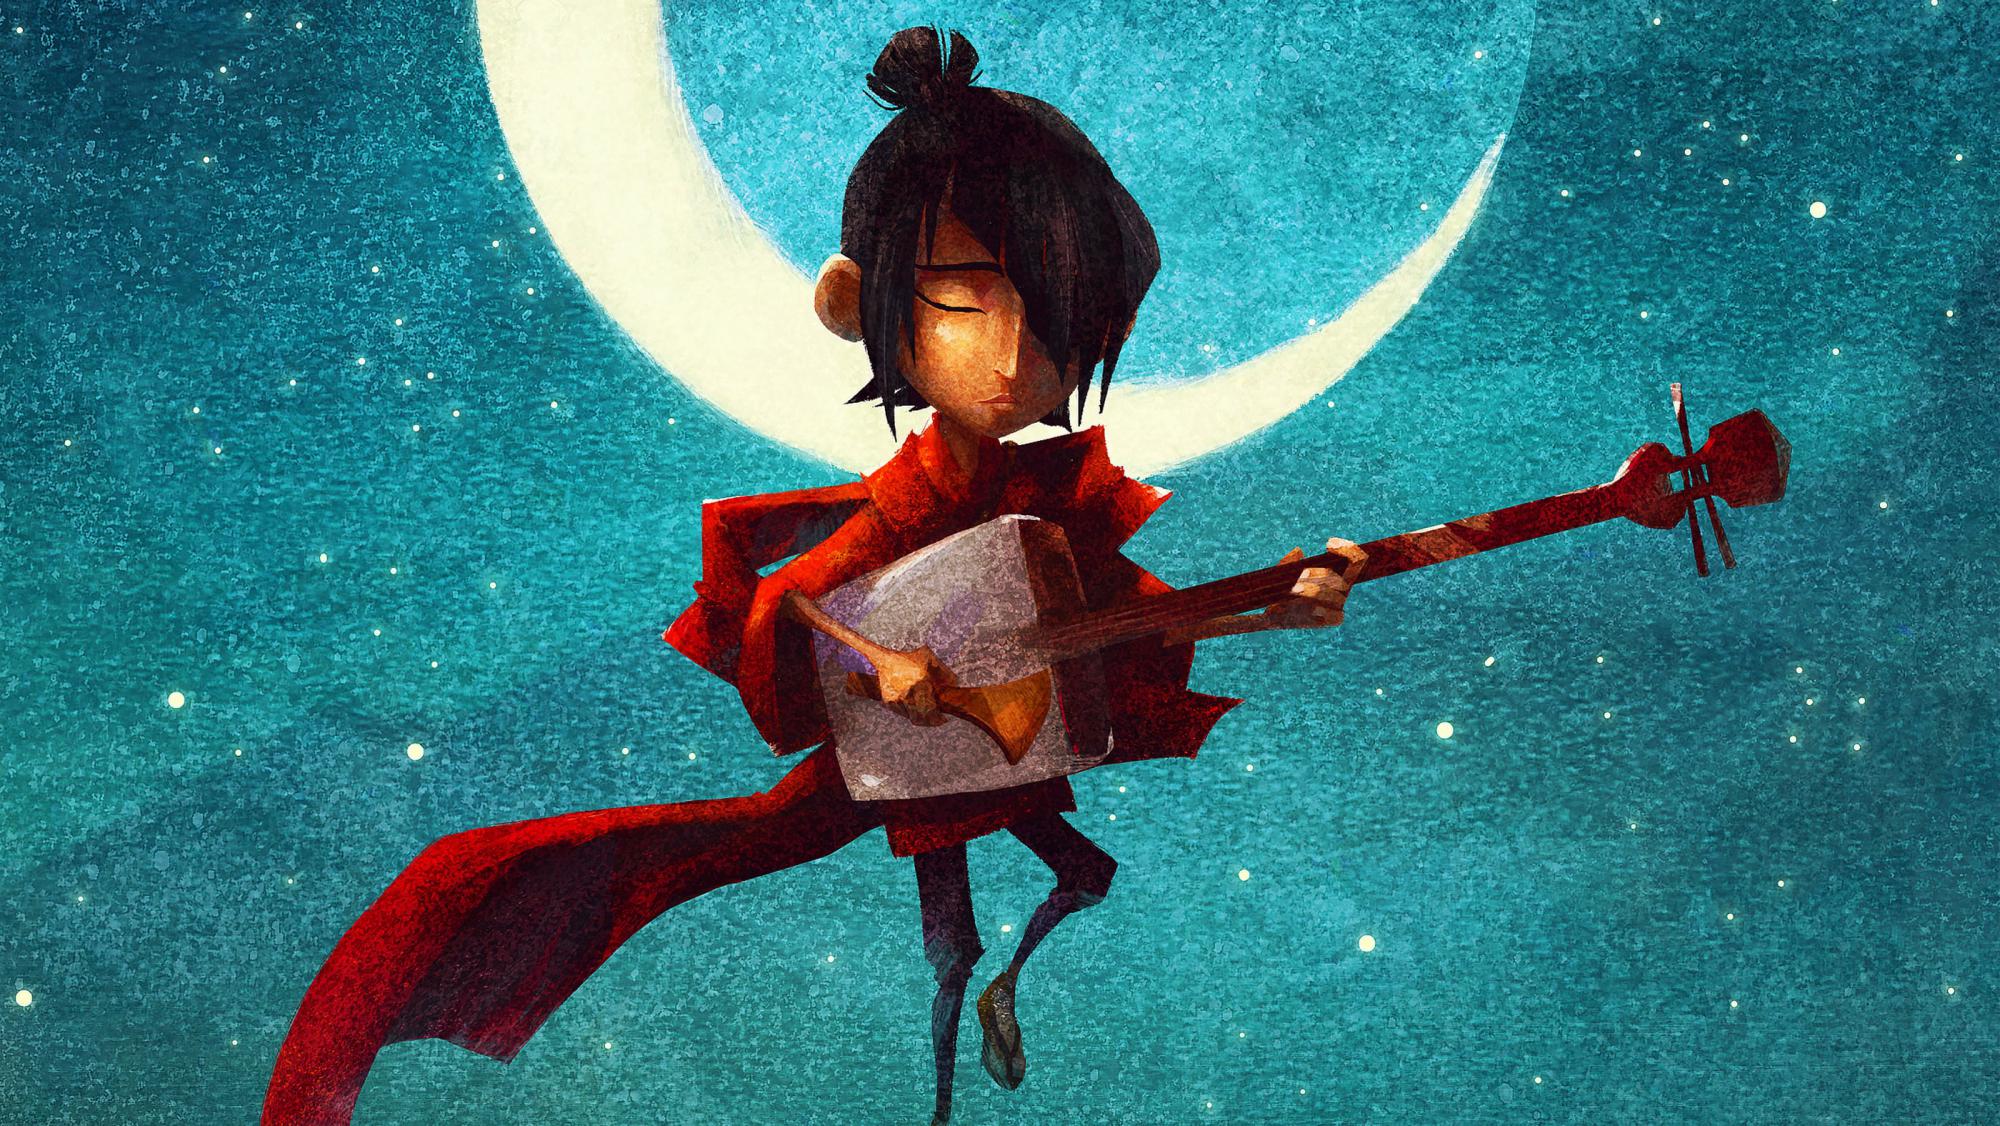 Backdrop Image for Kubo and the Two Strings